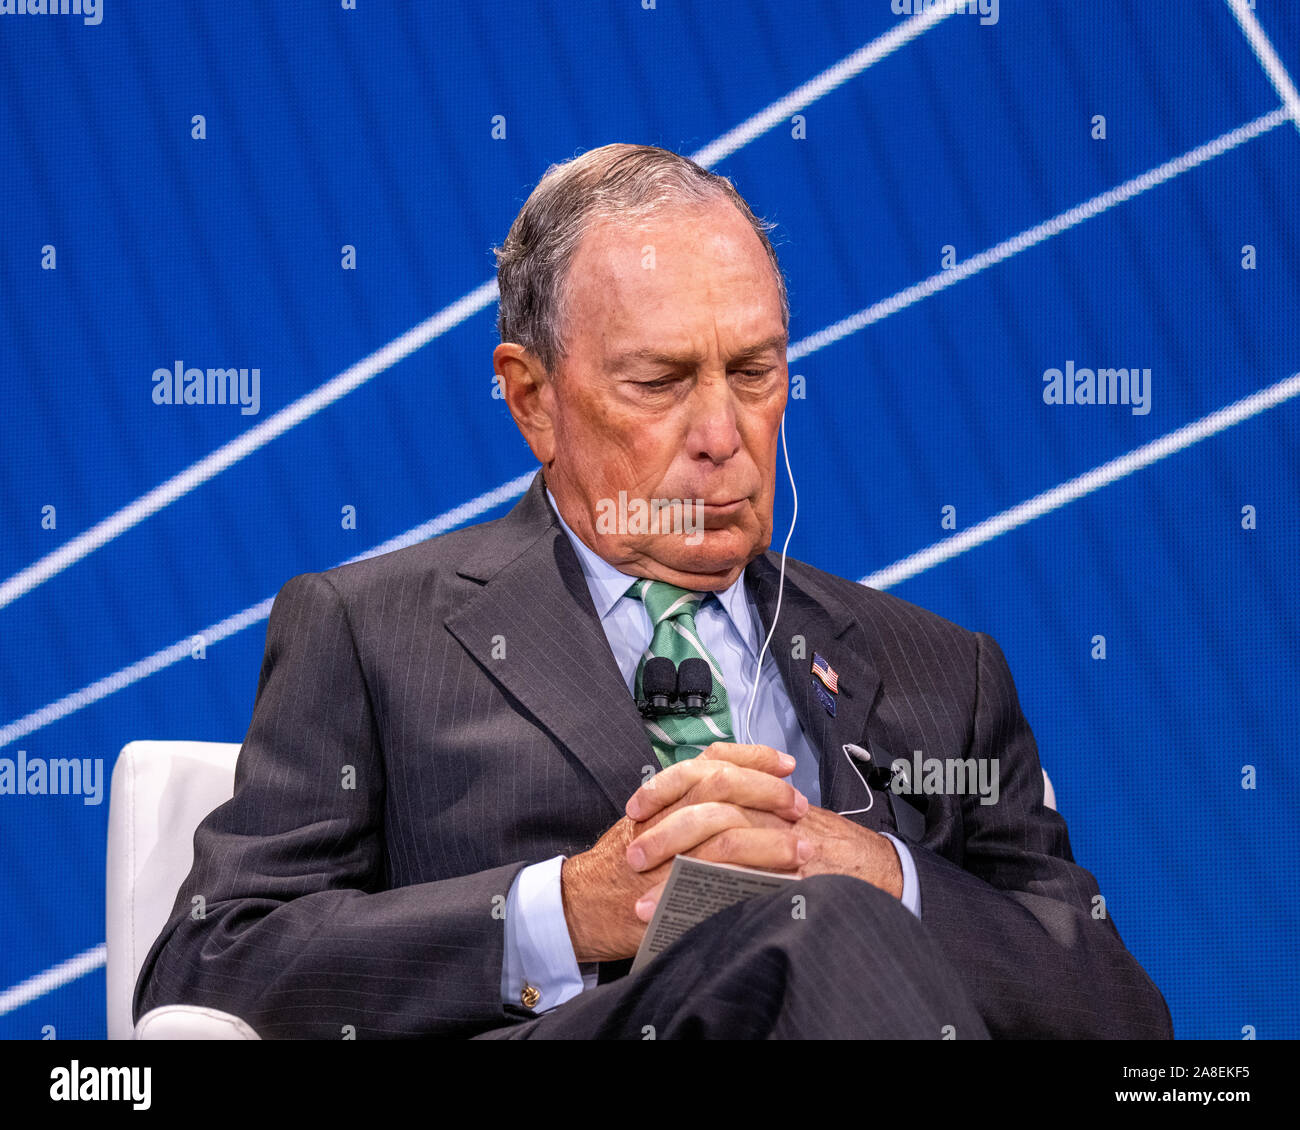 New York, USA,  25 September 2019.  Former New York City Mayor and billionaire Michael Bloomberg at the Bloomberg Global Business Forum.  Bloomberg is Stock Photo